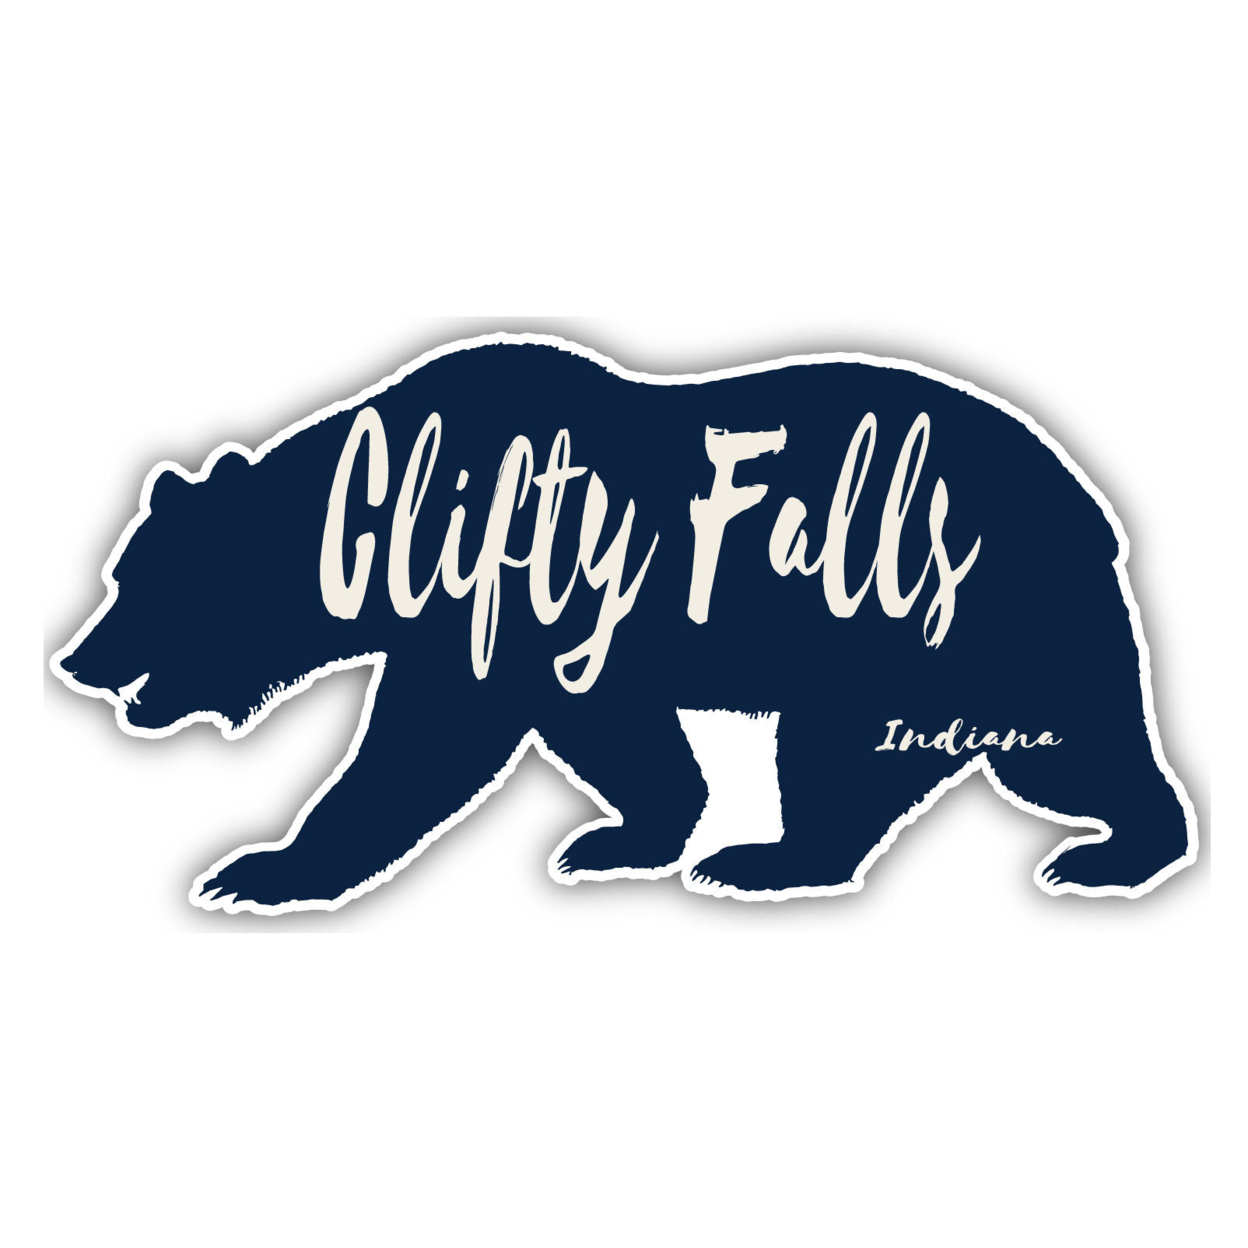 Clifty Falls Indiana Souvenir Decorative Stickers (Choose Theme And Size) - Single Unit, 4-Inch, Bear